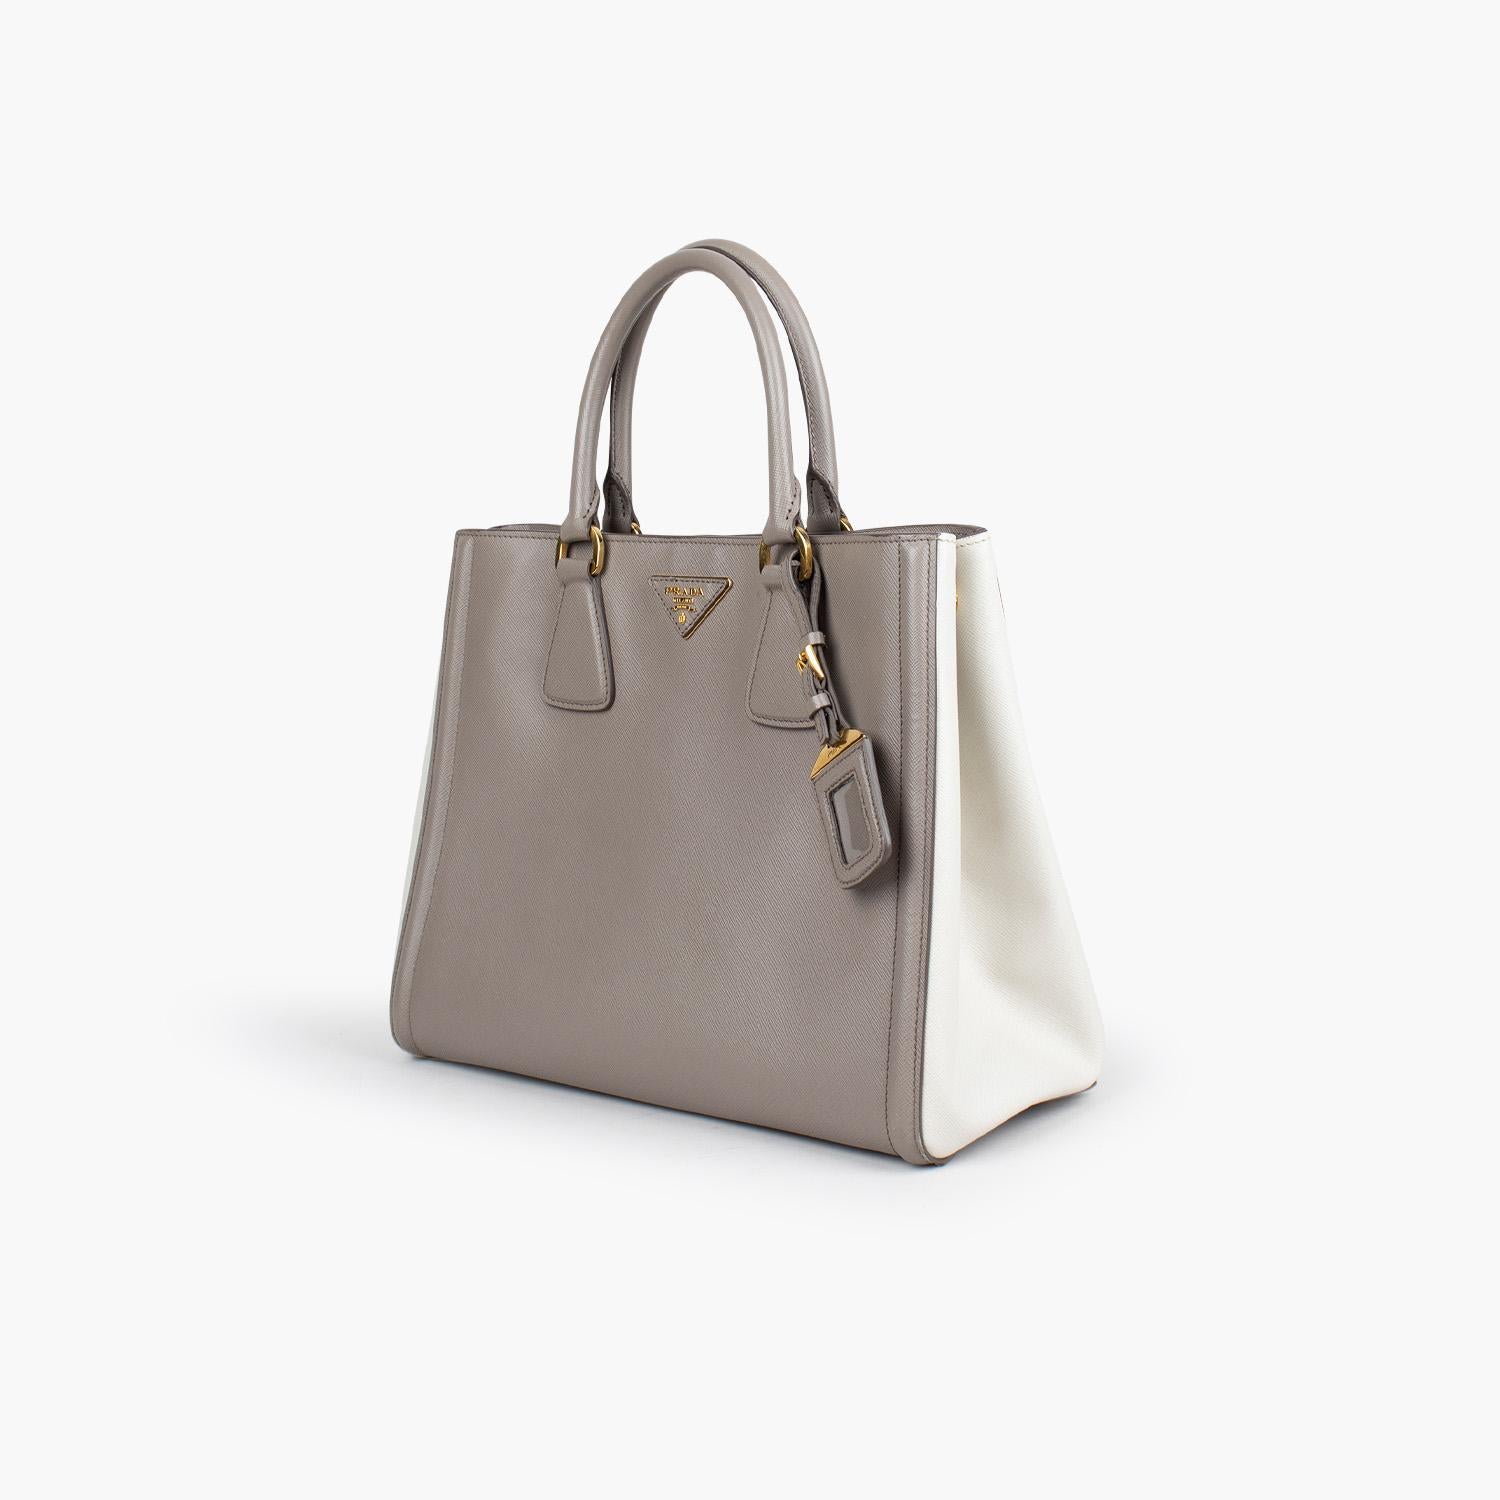 Grey and Cream Bicolor Saffiano Lux leather Prada tote with

- Brass hardware
- Dual rolled top handles
- Single detachable flat adjustable shoulder strap
- Logo placard at face
- Protective feet at base, tonal logo jacquard lining, five interior